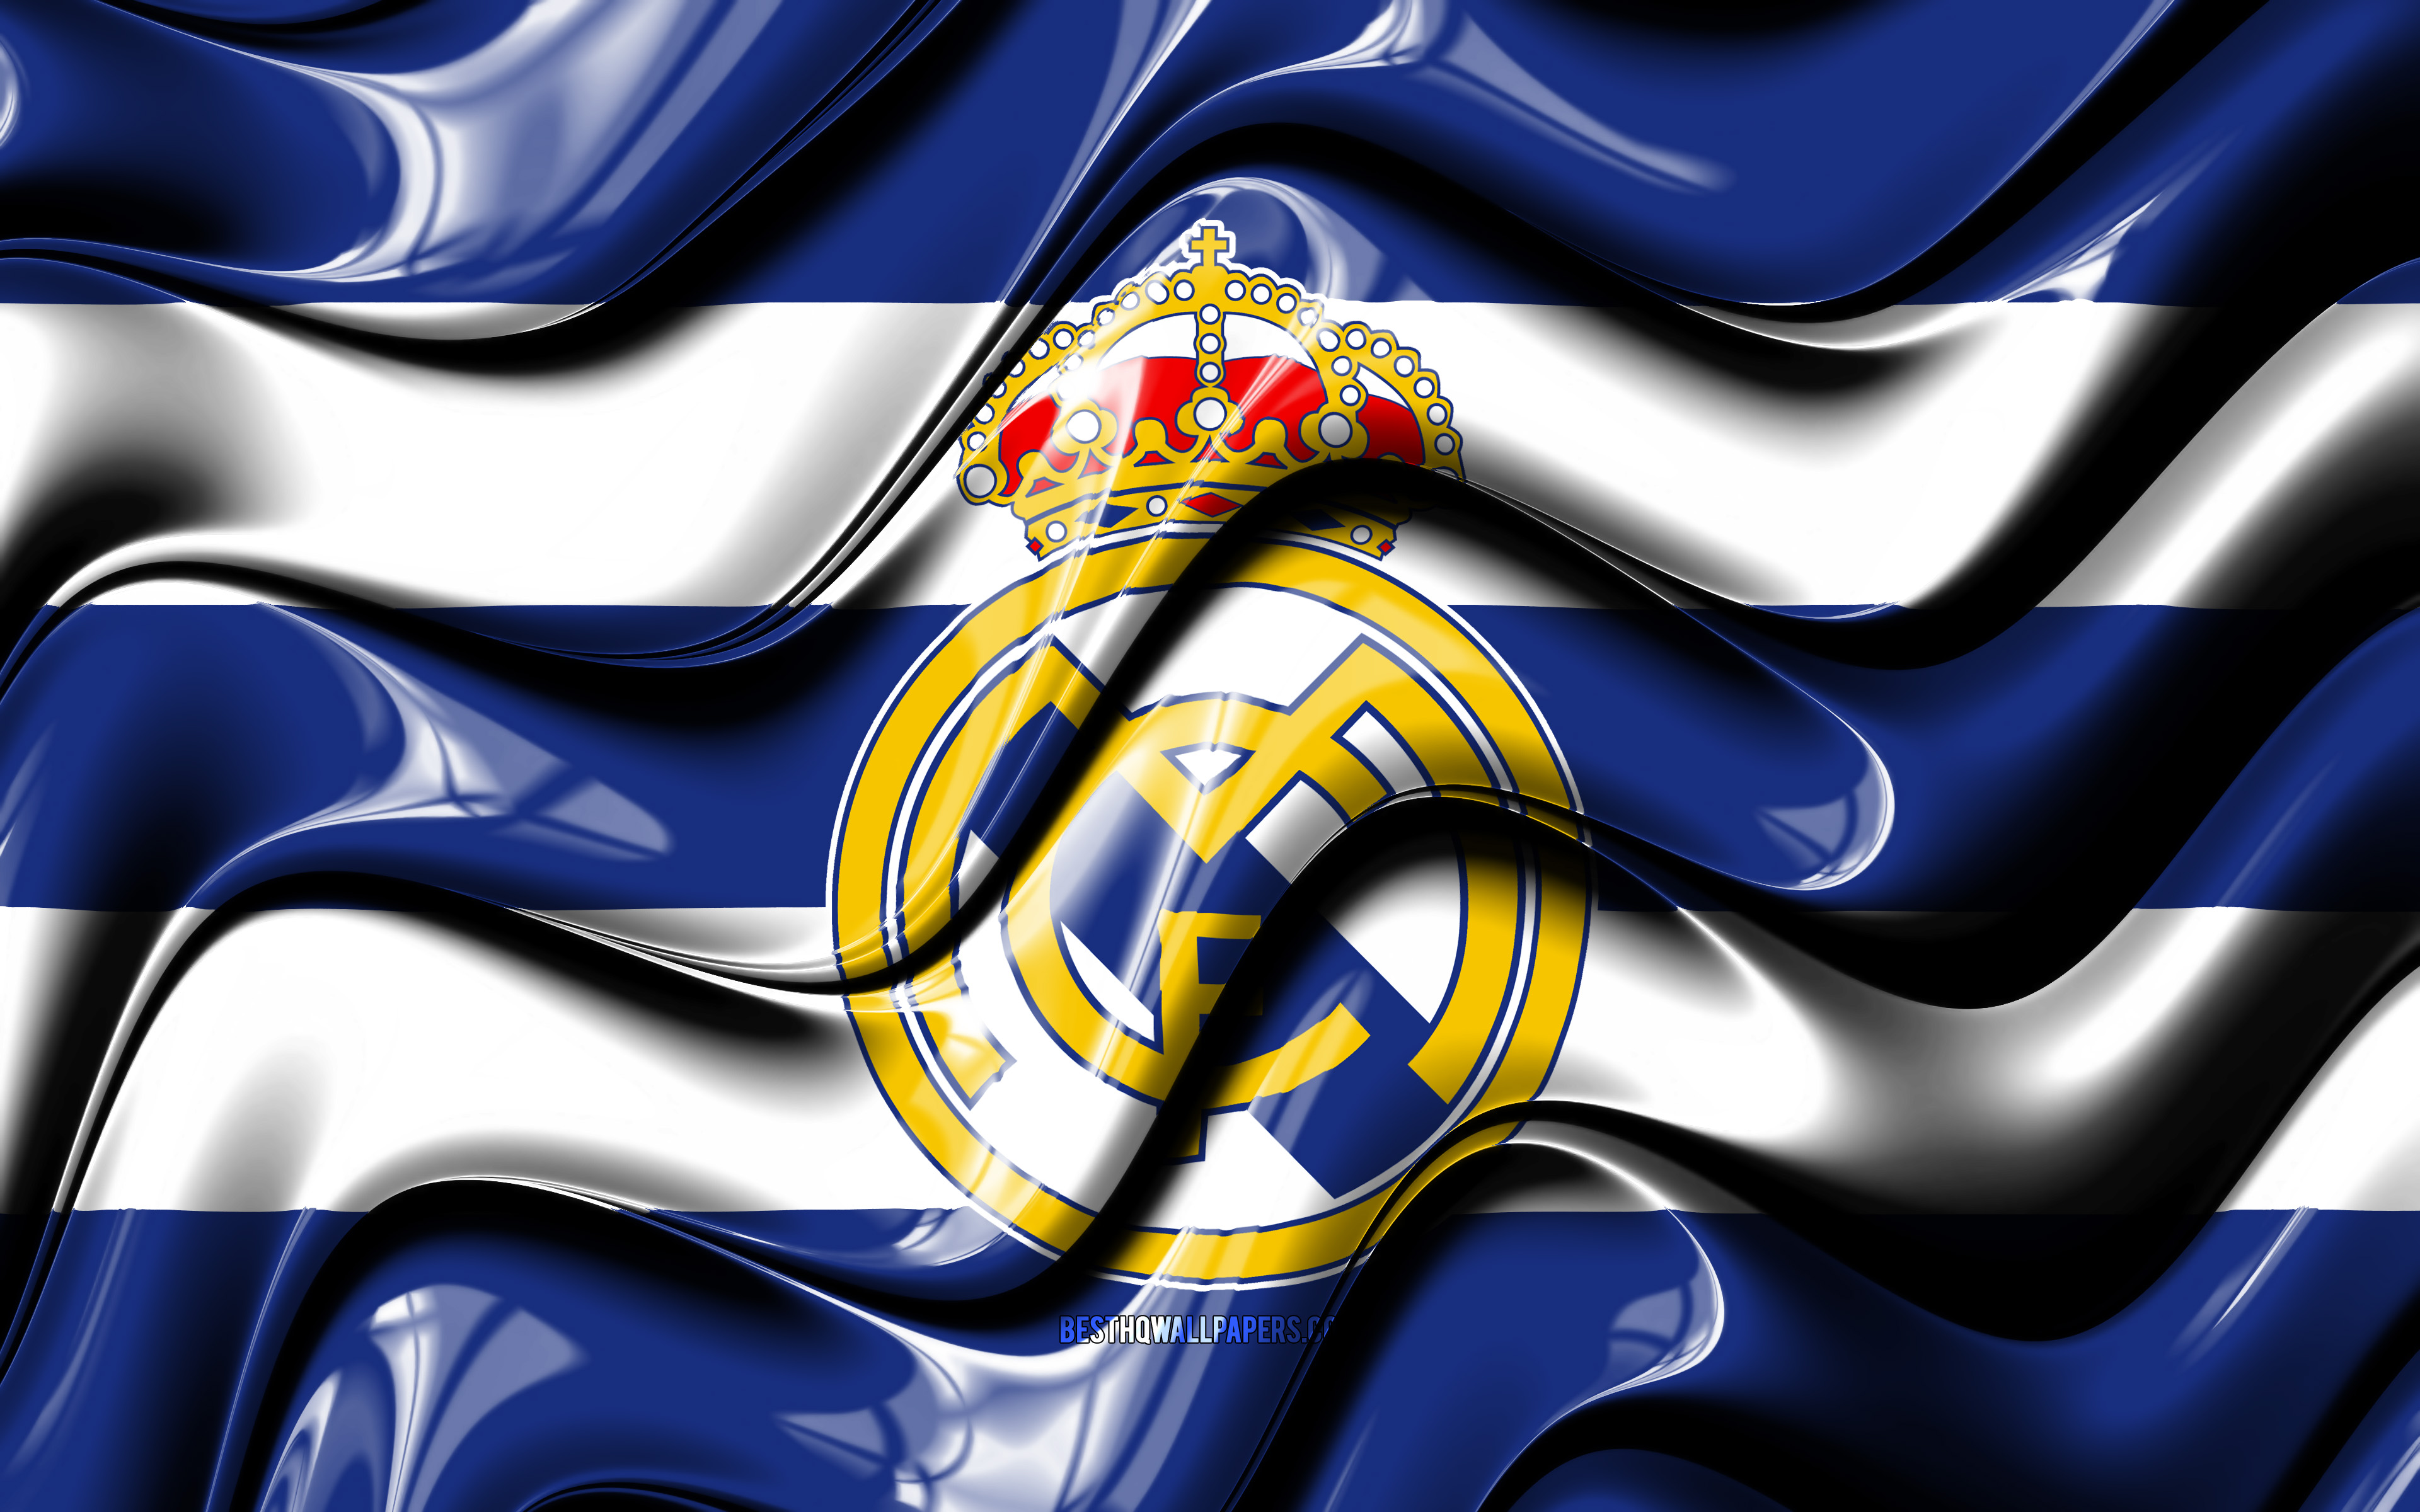 Download wallpaper Real Madrid flag, 4k, blue and white 3D waves, LaLiga, spanish football club, football, Real Madrid logo, La Liga, Real Madrid FC, soccer, Real Madrid CF for desktop with resolution